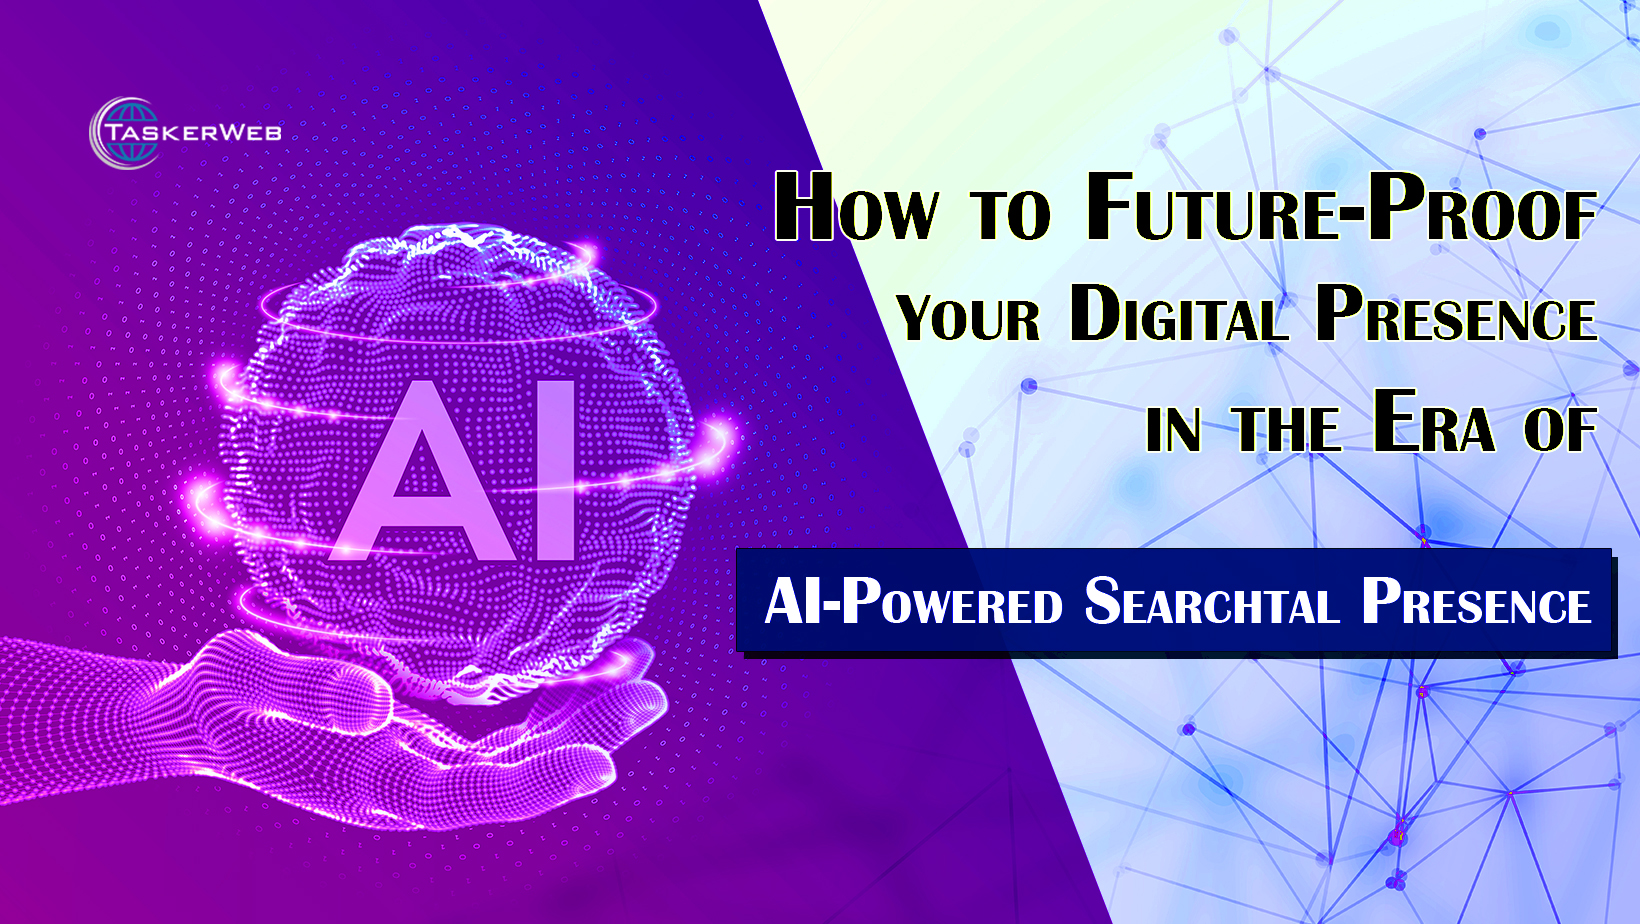 How to Future-Proof Your Digital Presence in the Era of AI-Powered Search